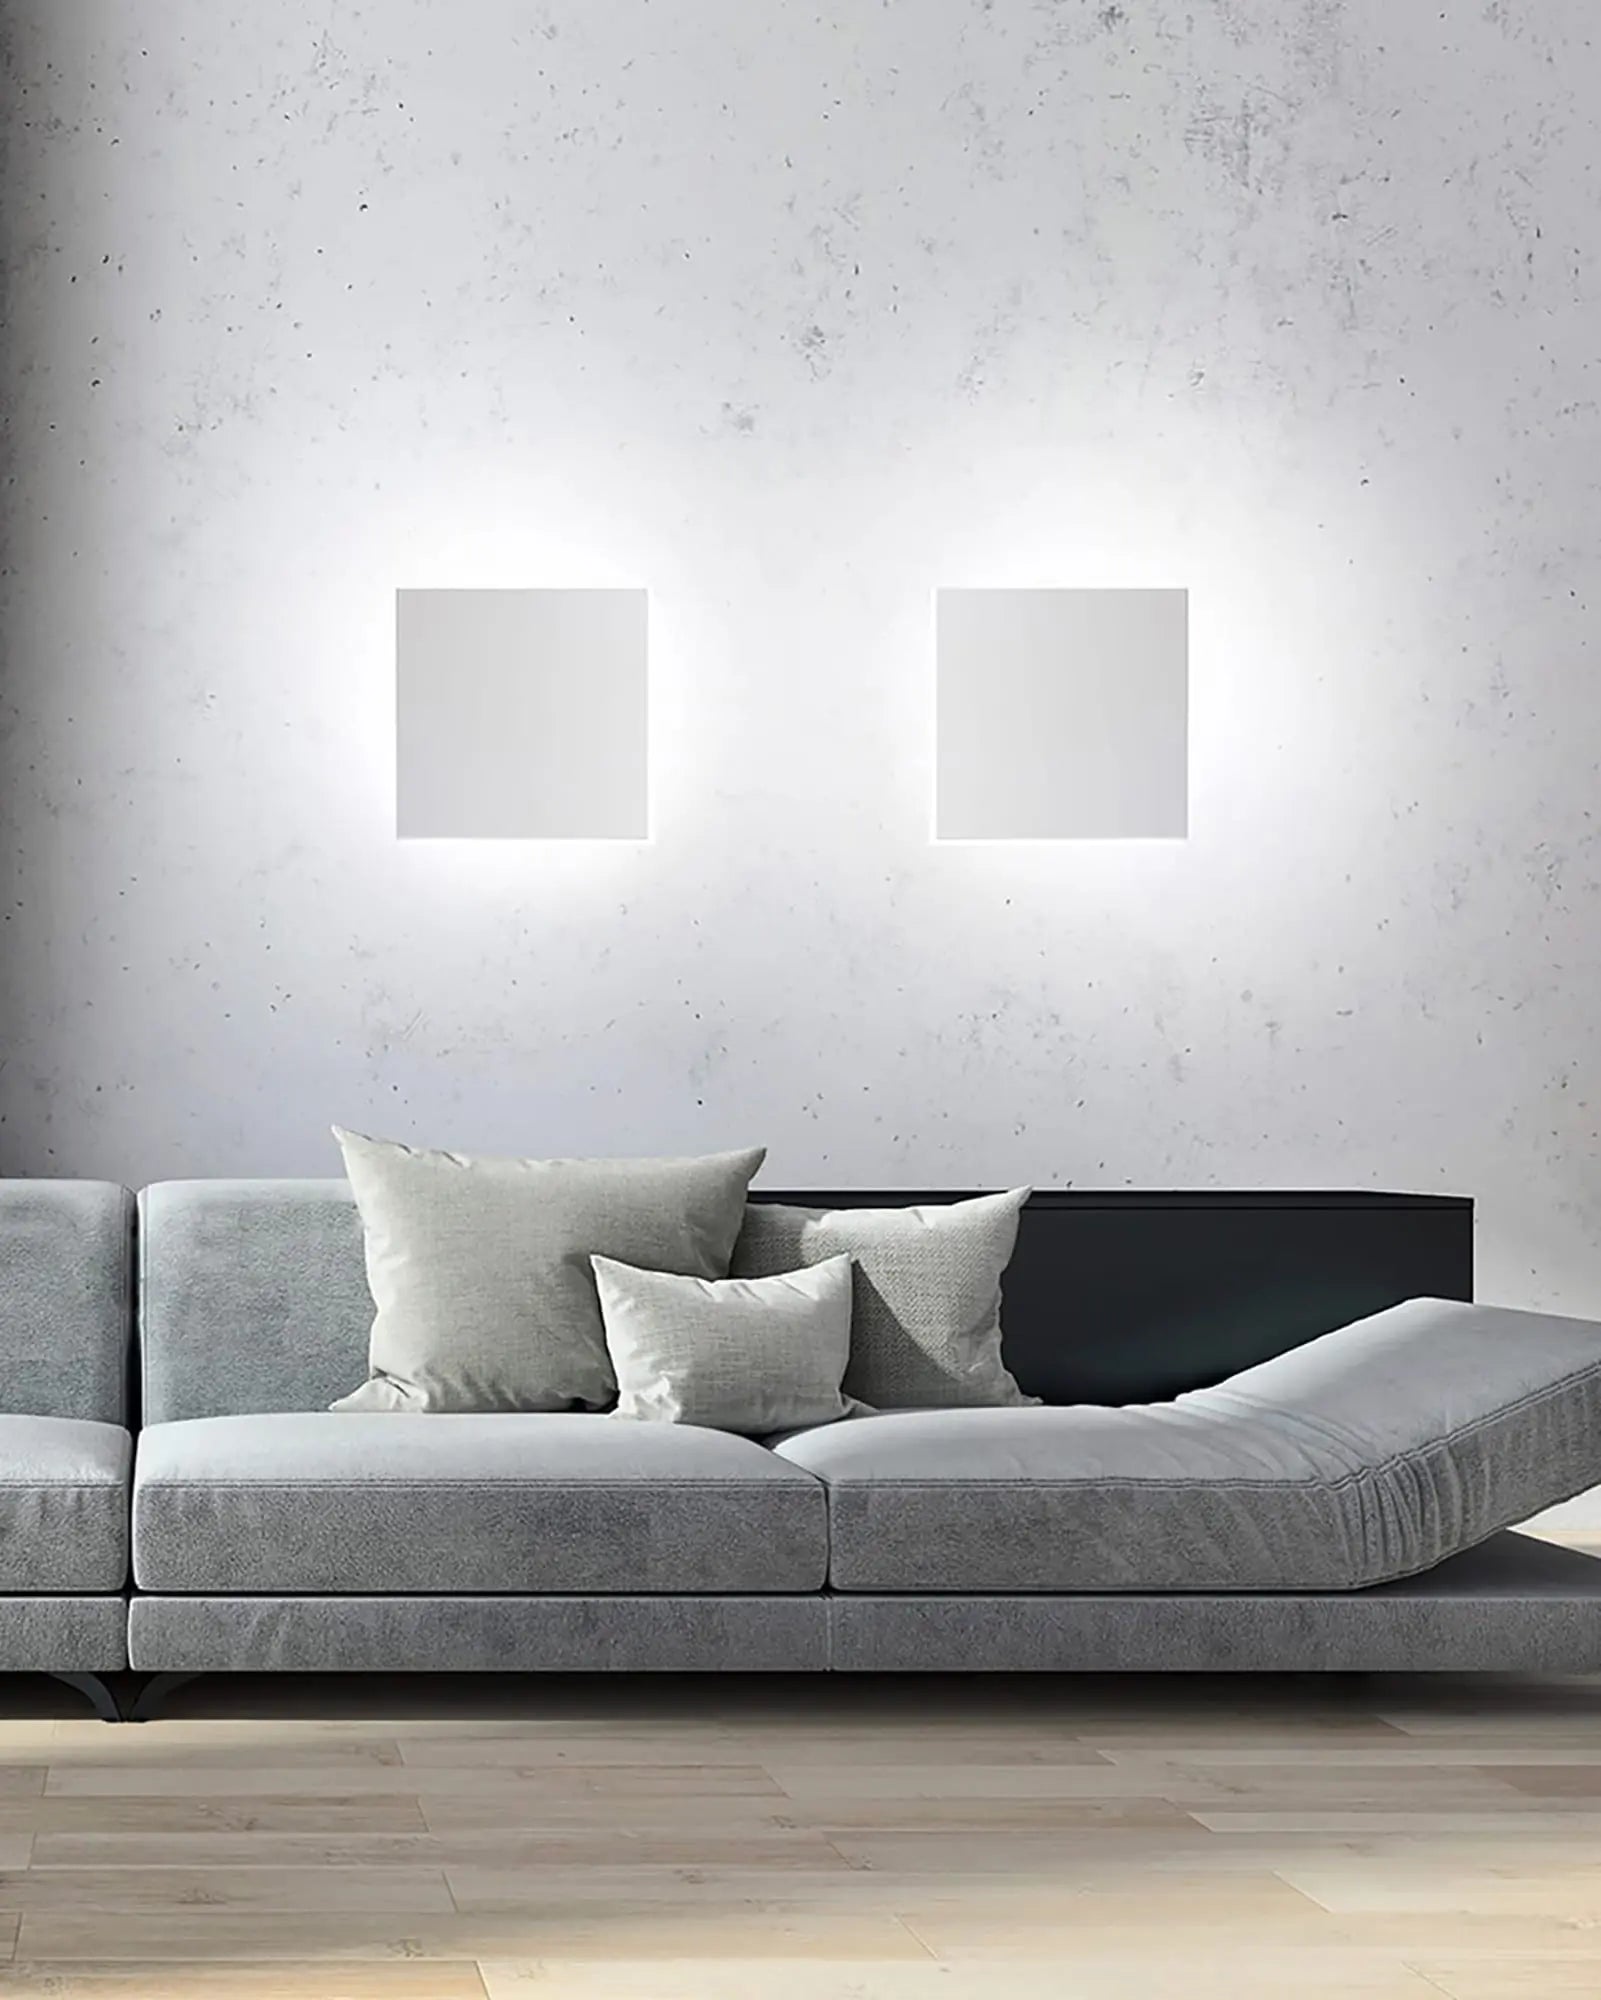 Aldecimo made in Italy square flat wall light cluster above a sofa lounge area